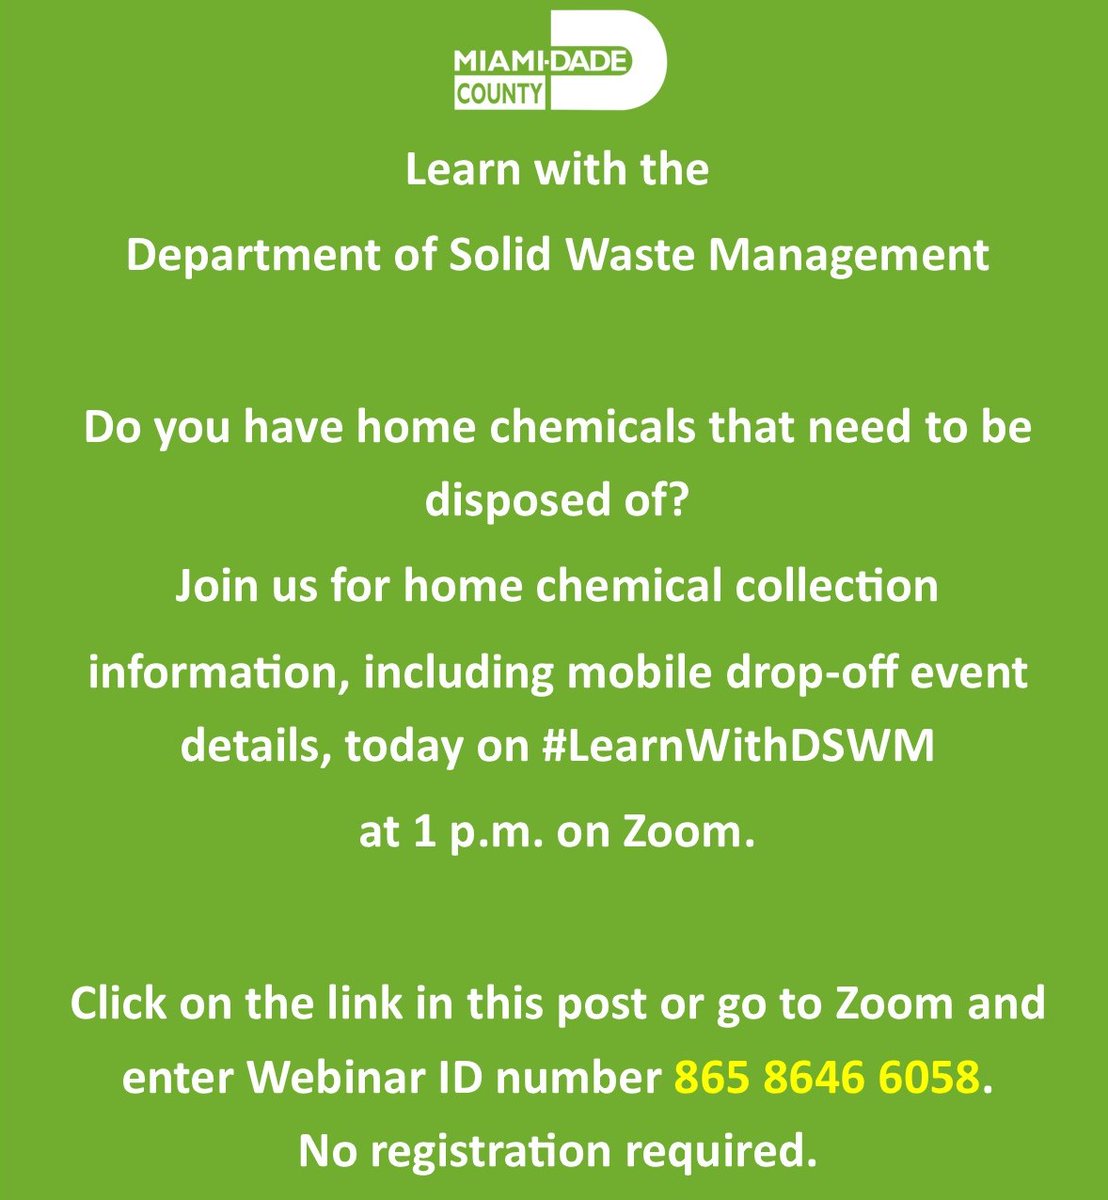 Join us for home chemical collection info, on #LearnWithDSWM today at 1 p.m. on Zoom. Visit miamidade.zoom.us/j/86586466058 to join or go to Zoom and enter Webinar ID number 865 8646 6058. No need to register. Can't watch live? - Watch on demand at bddy.me/3XtZIUk.